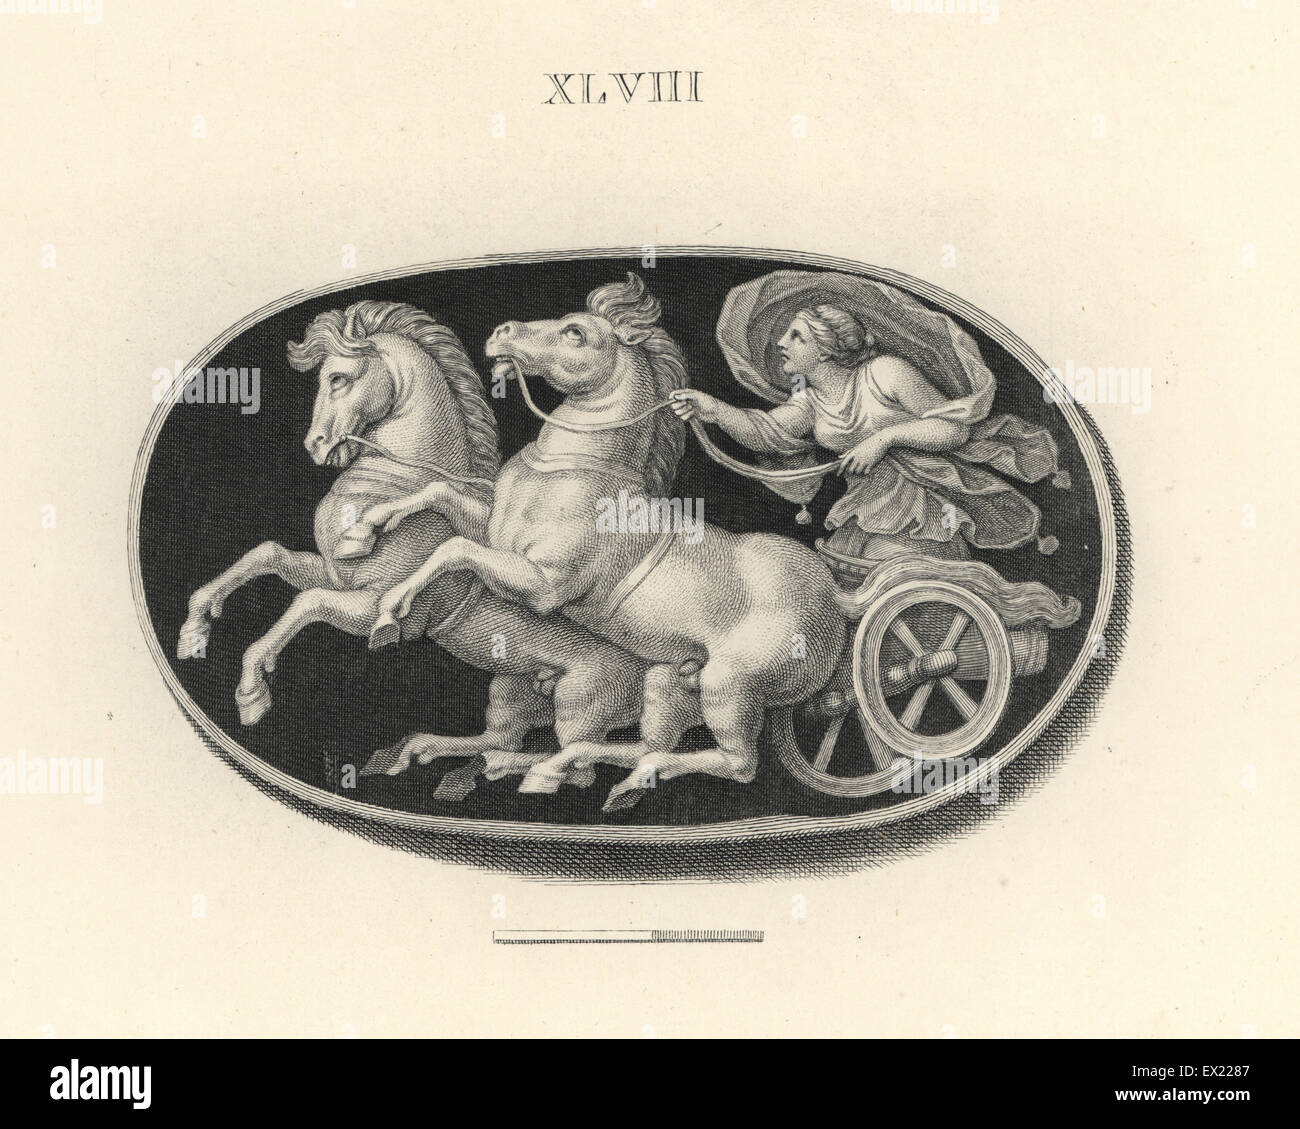 Female charioteer driving a two-horse chariot or biga in a race. Copperplate engraving by Francesco Bartolozzi from 108 Plates of Antique Gems, 1860. The gems were from the Duke of Marlborough's collection. Stock Photo